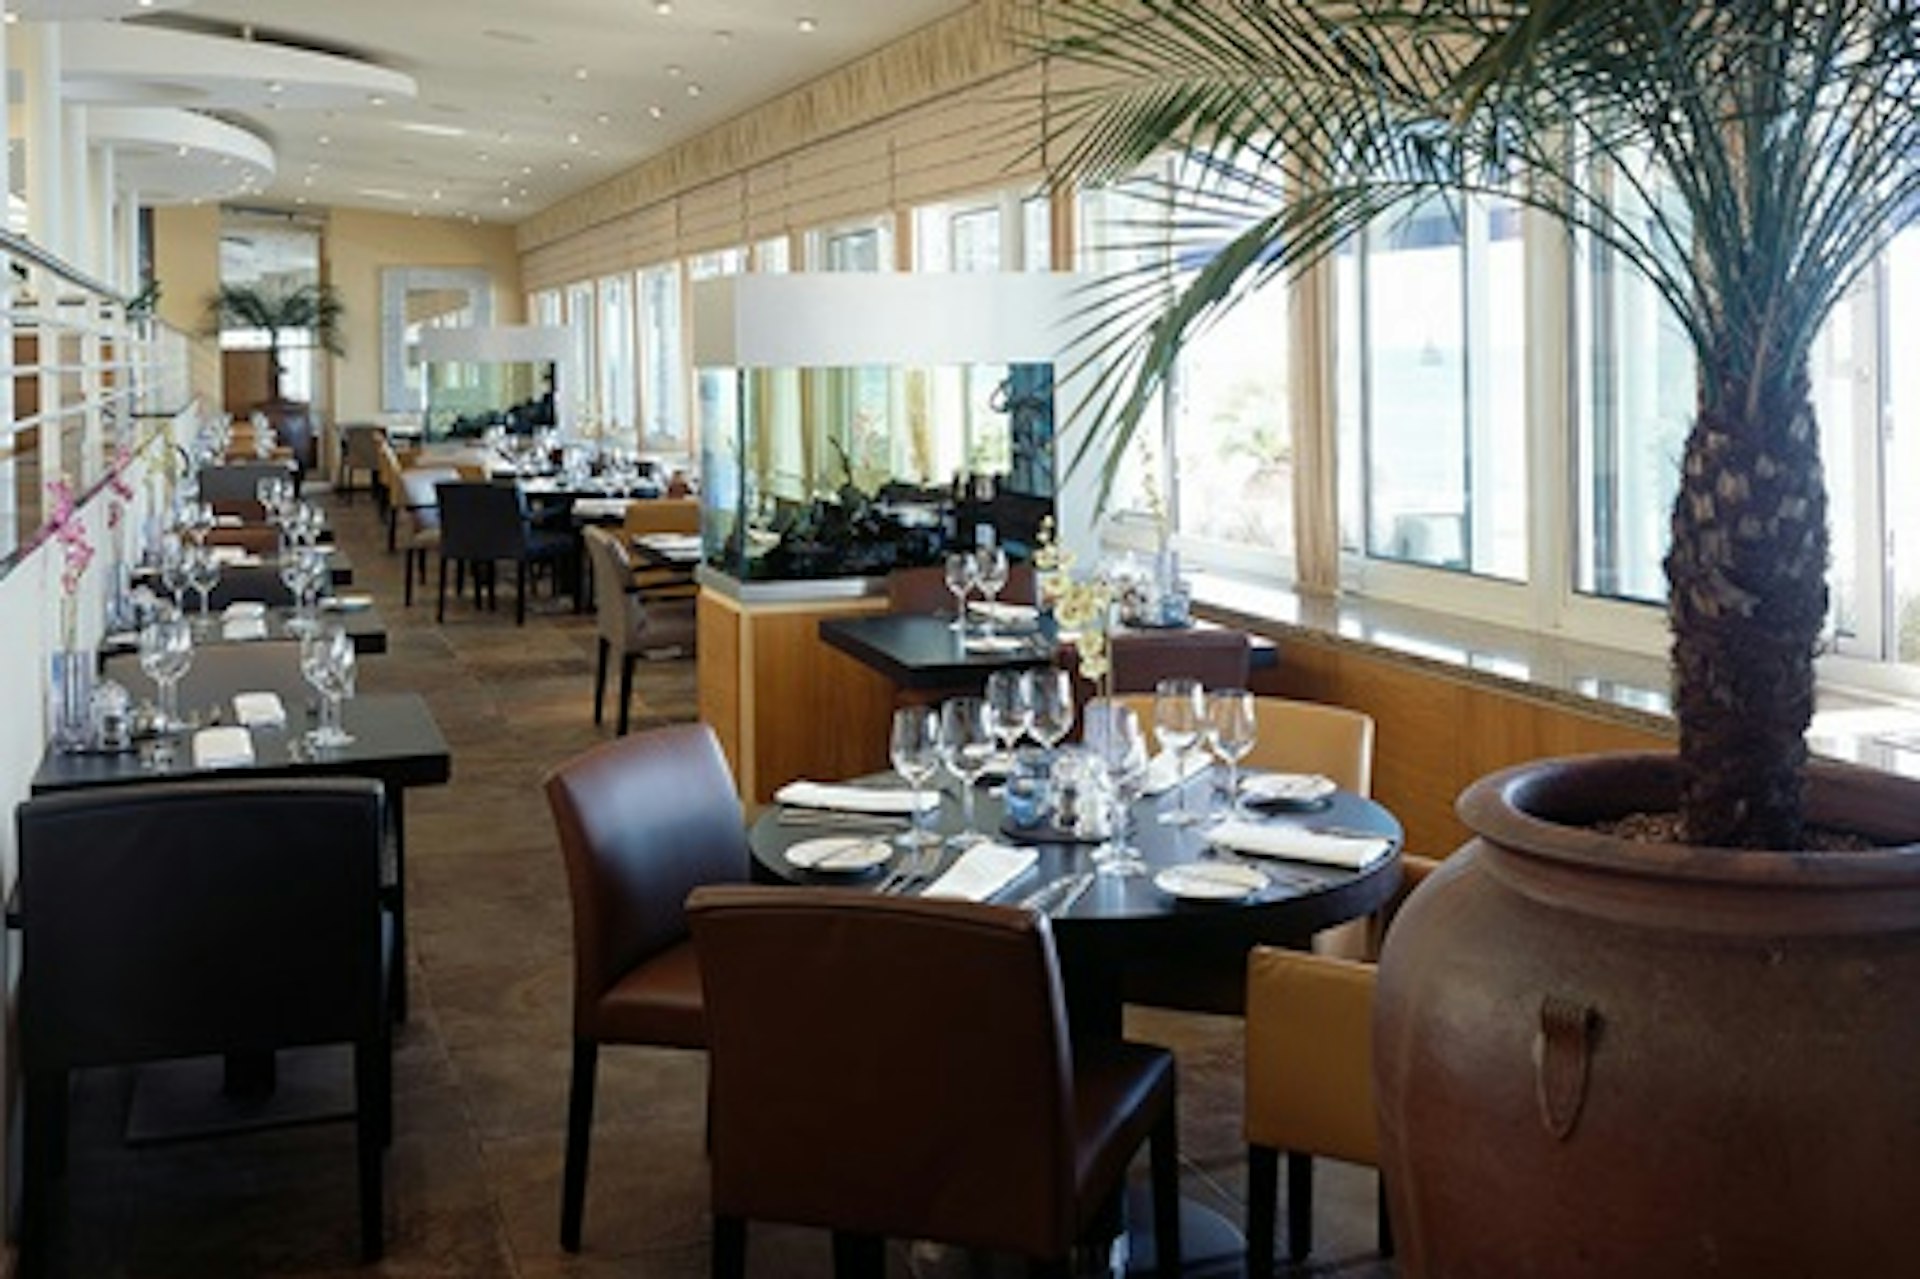 Two Night Winter Coastal Break for Two at The 4* Haven Hotel, Sandbanks 4